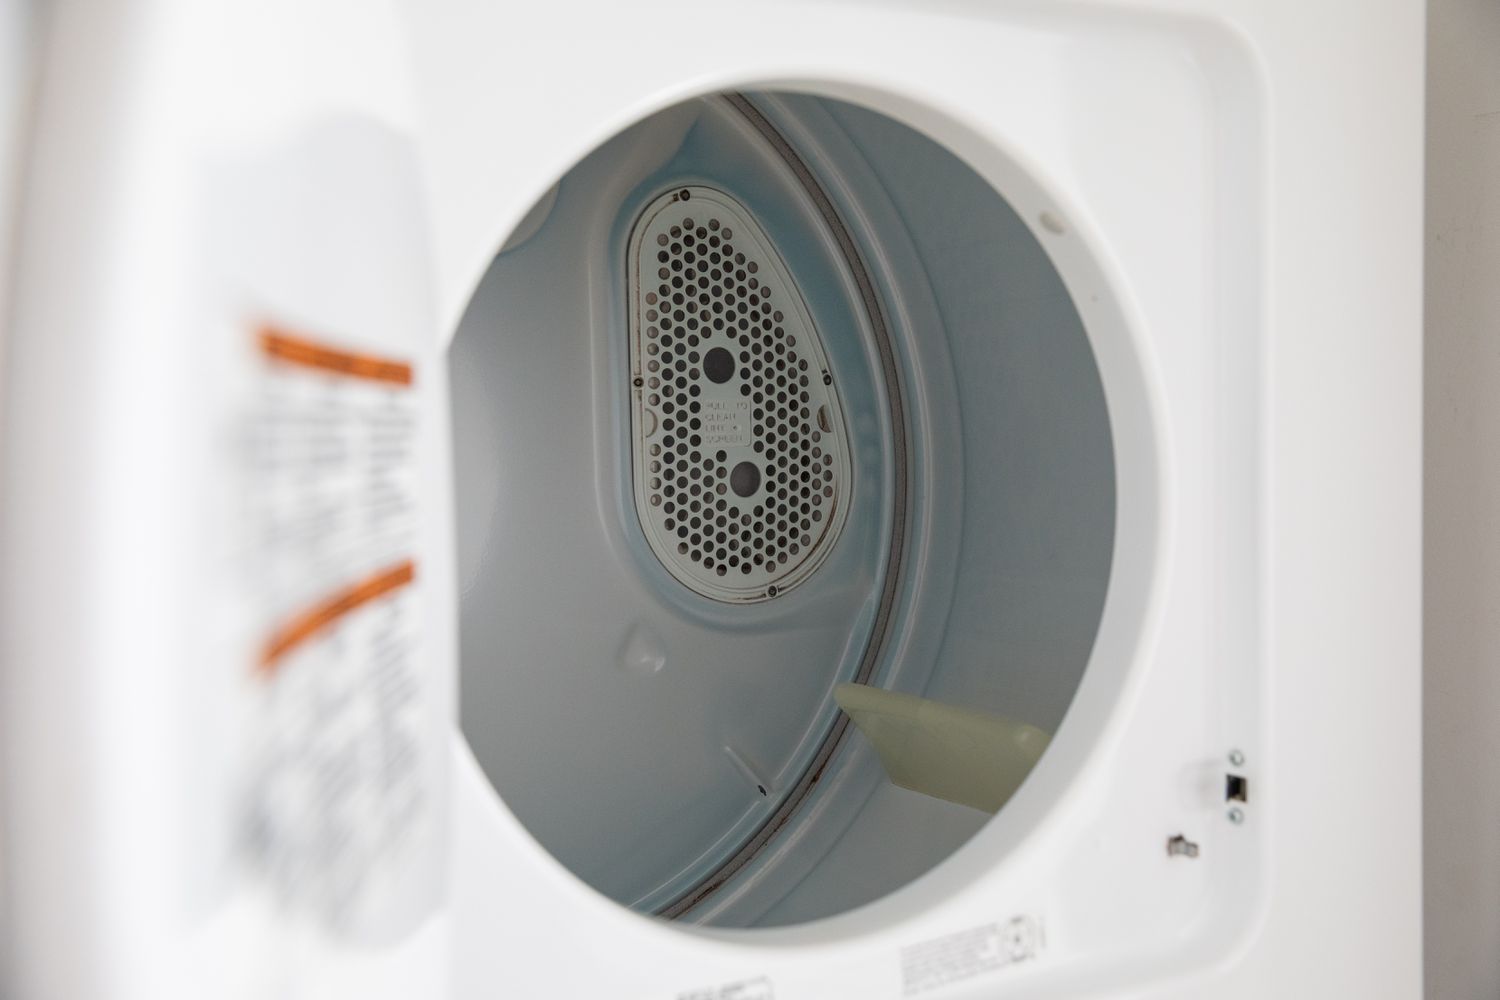 How To Fix The Error Code E76 For GE Dryer